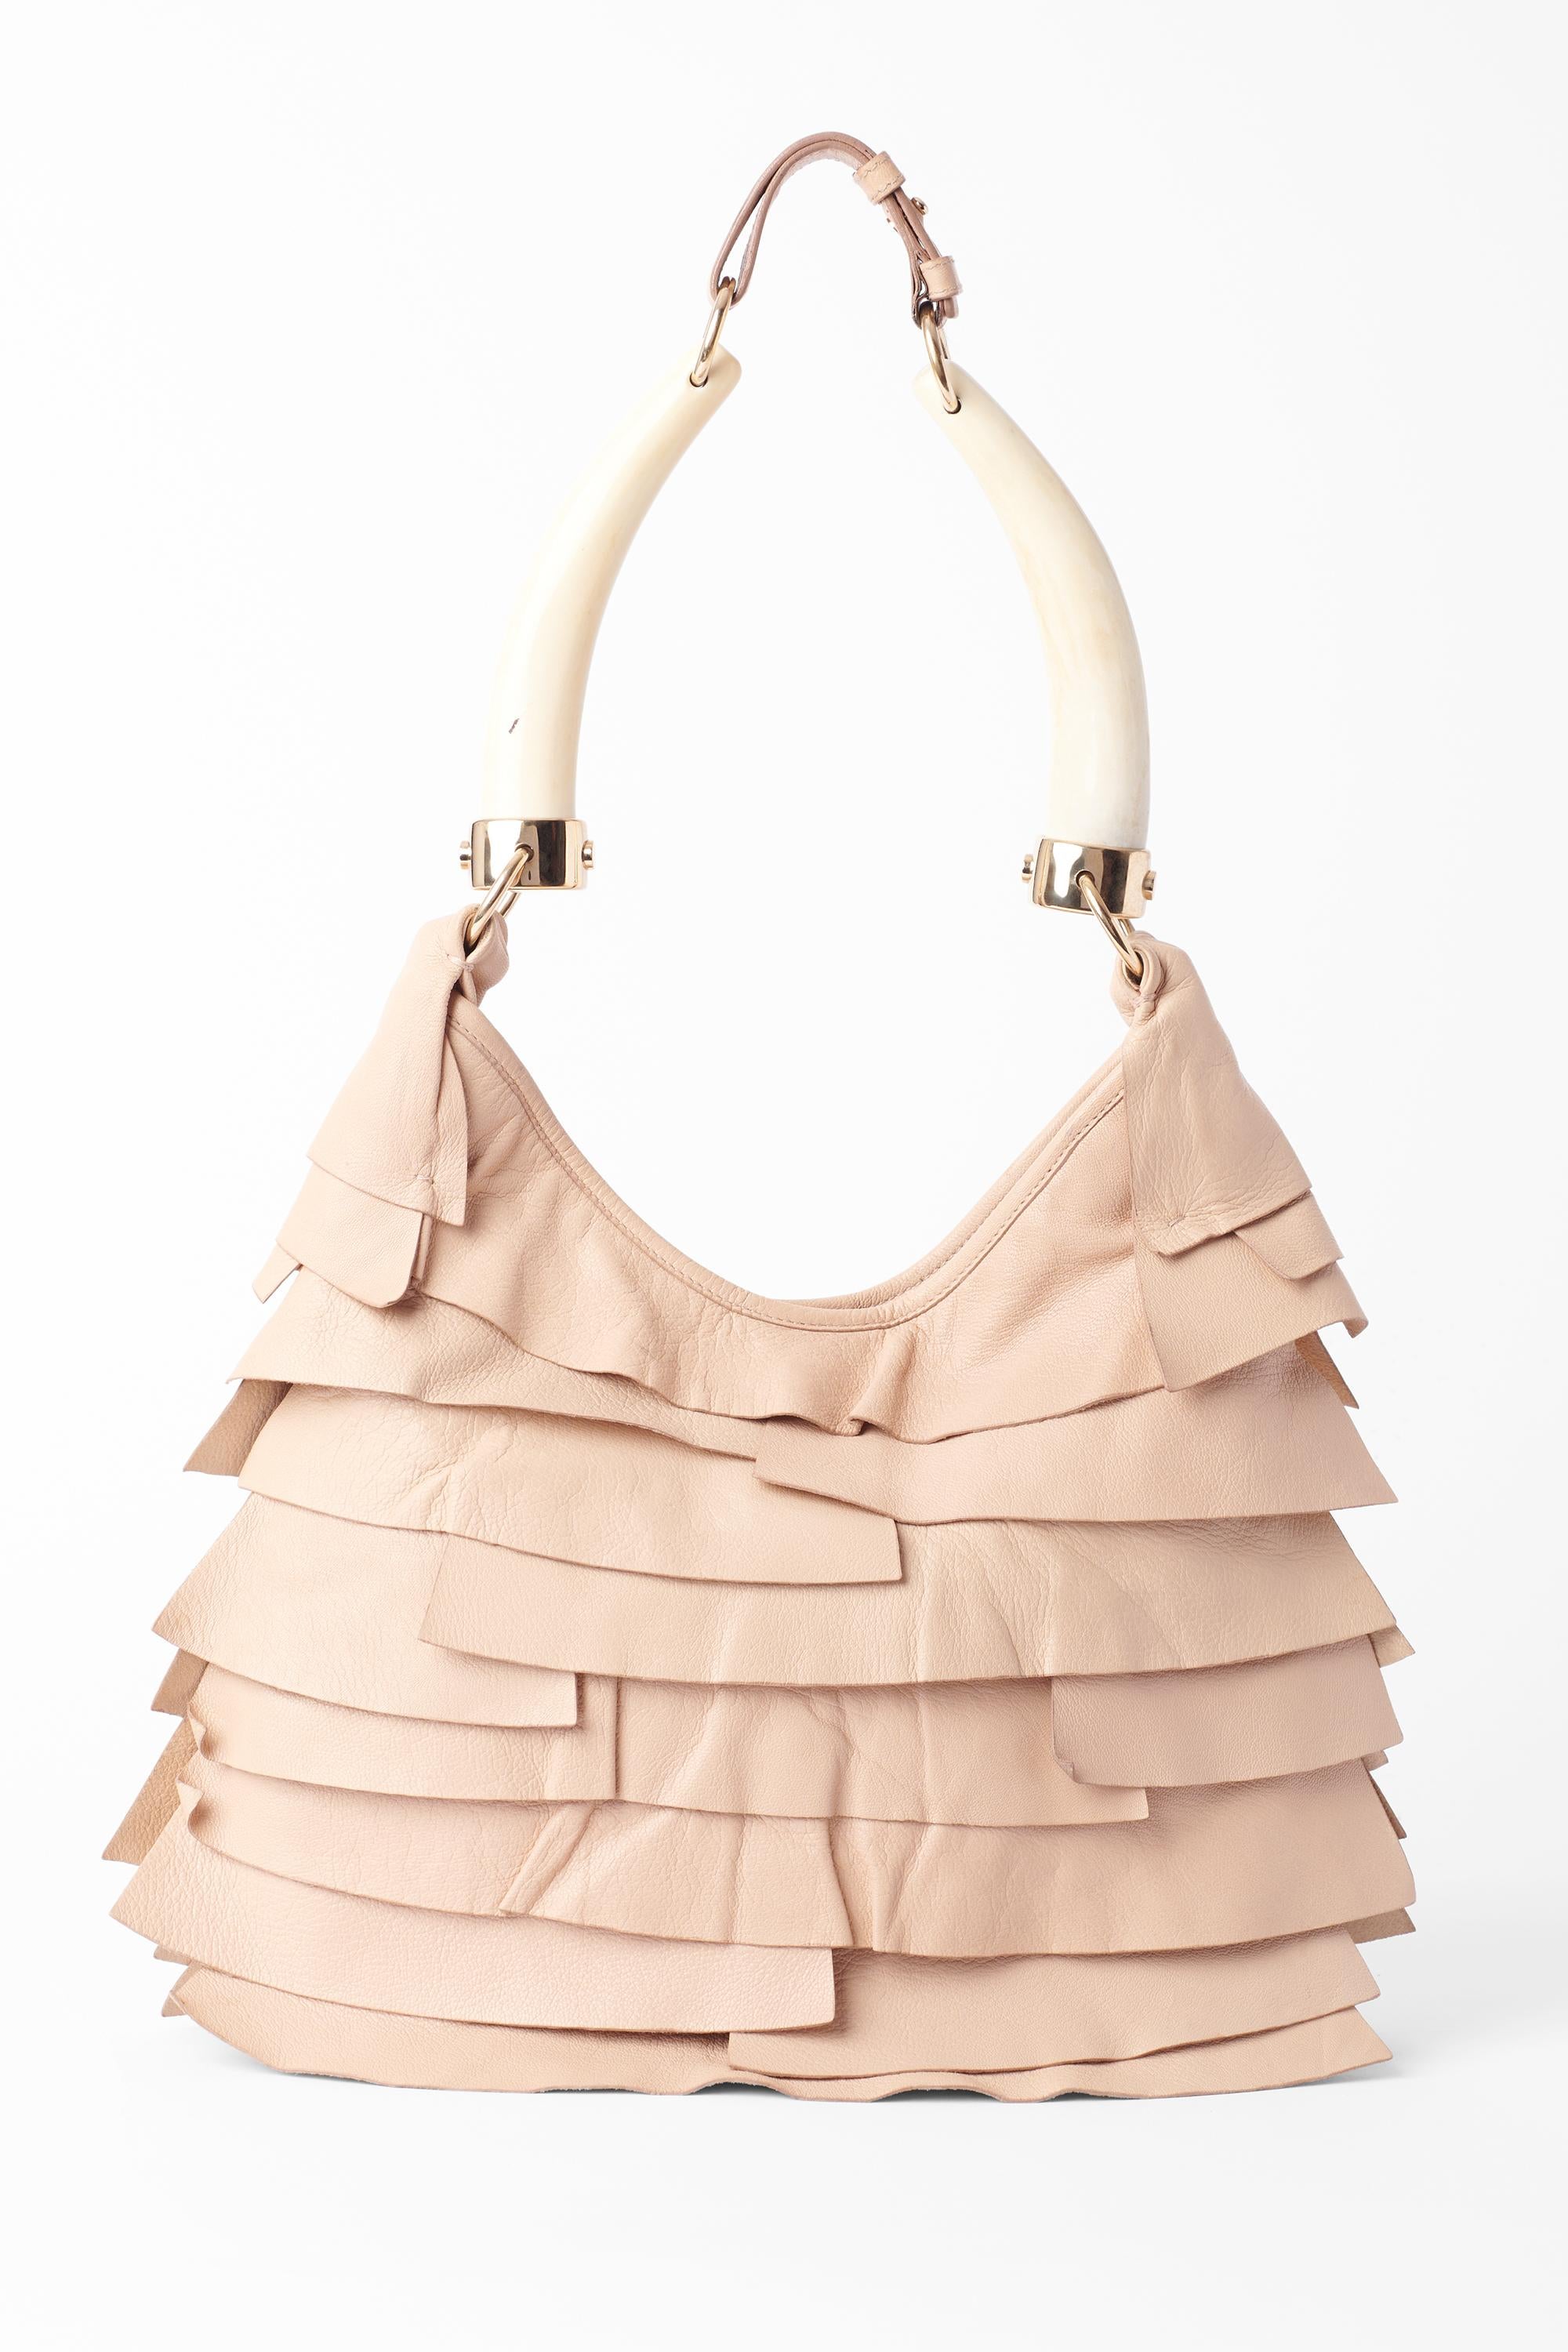 Vintage F/W 2004 Beige St Tropez Ruffled Bag In Excellent Condition For Sale In London, GB